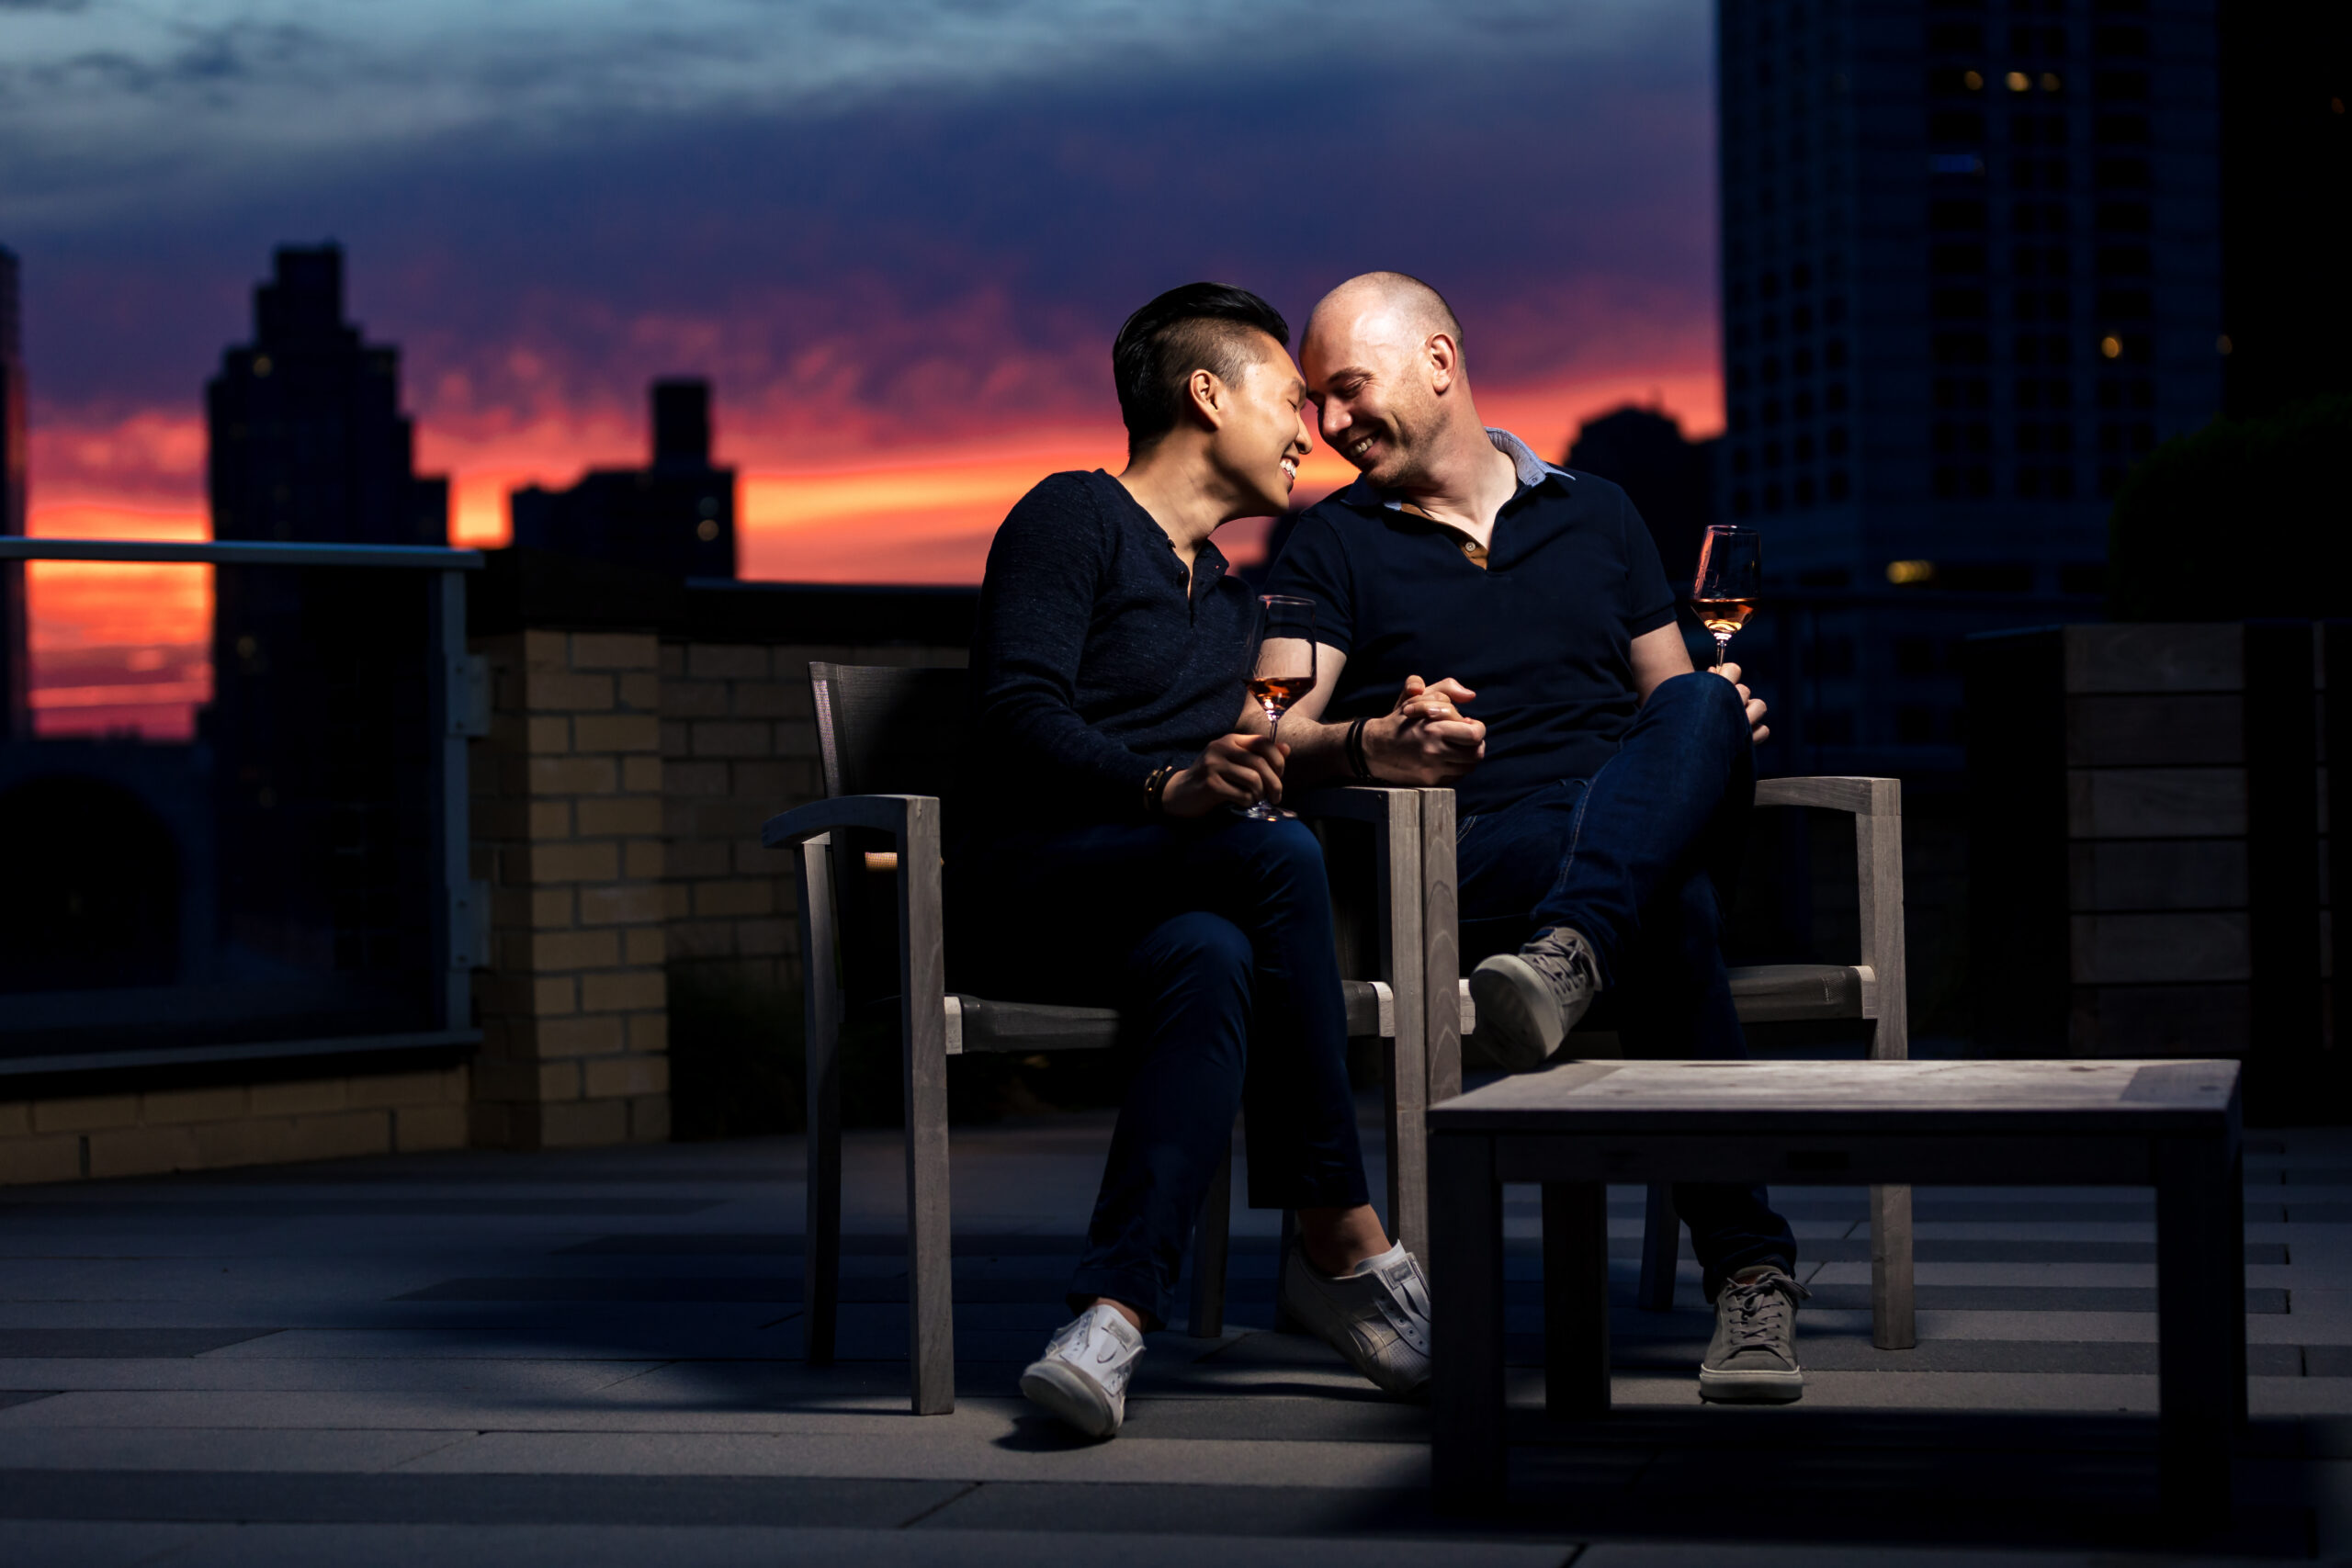 Two men sitting on chairs on a rooftop at sunset, captured by New Jersey Wedding Photographer.